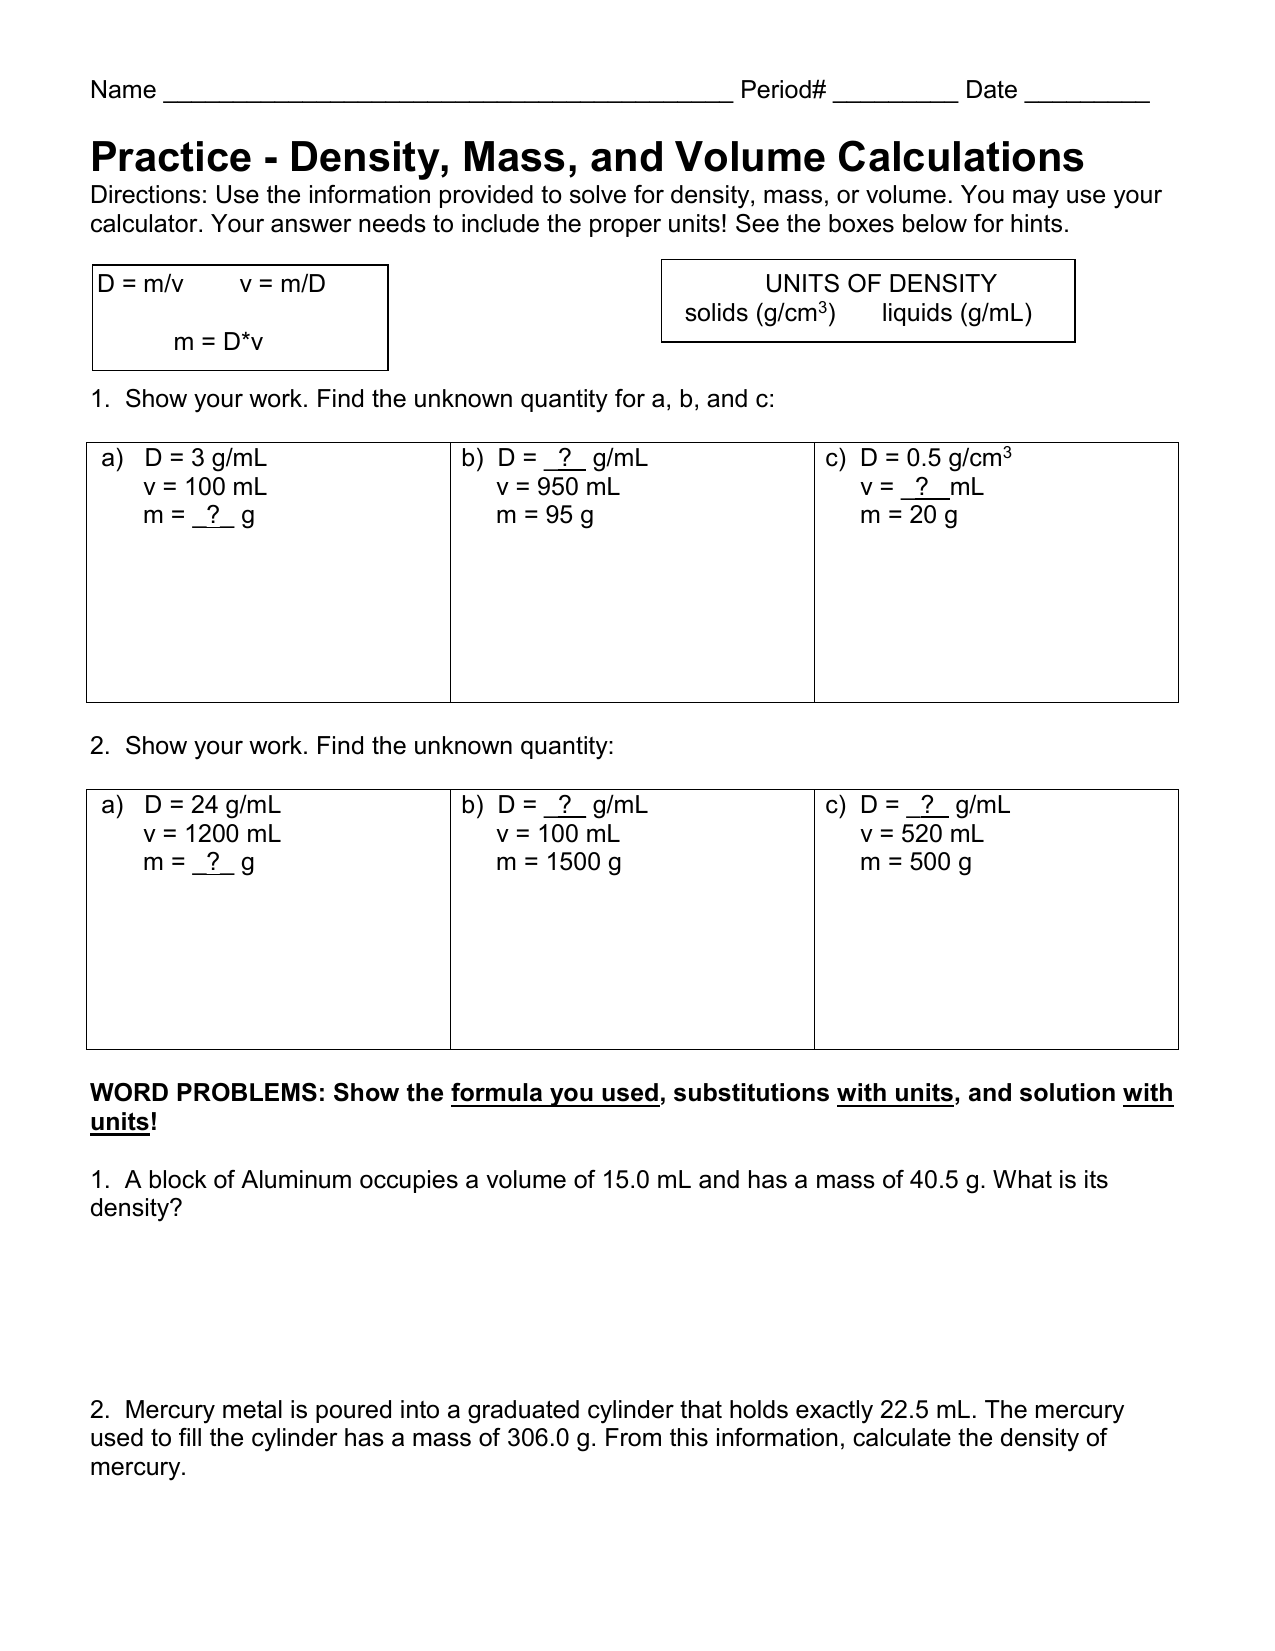 Density Calculations Worksheet I Pertaining To Density Calculations Worksheet Answer Key